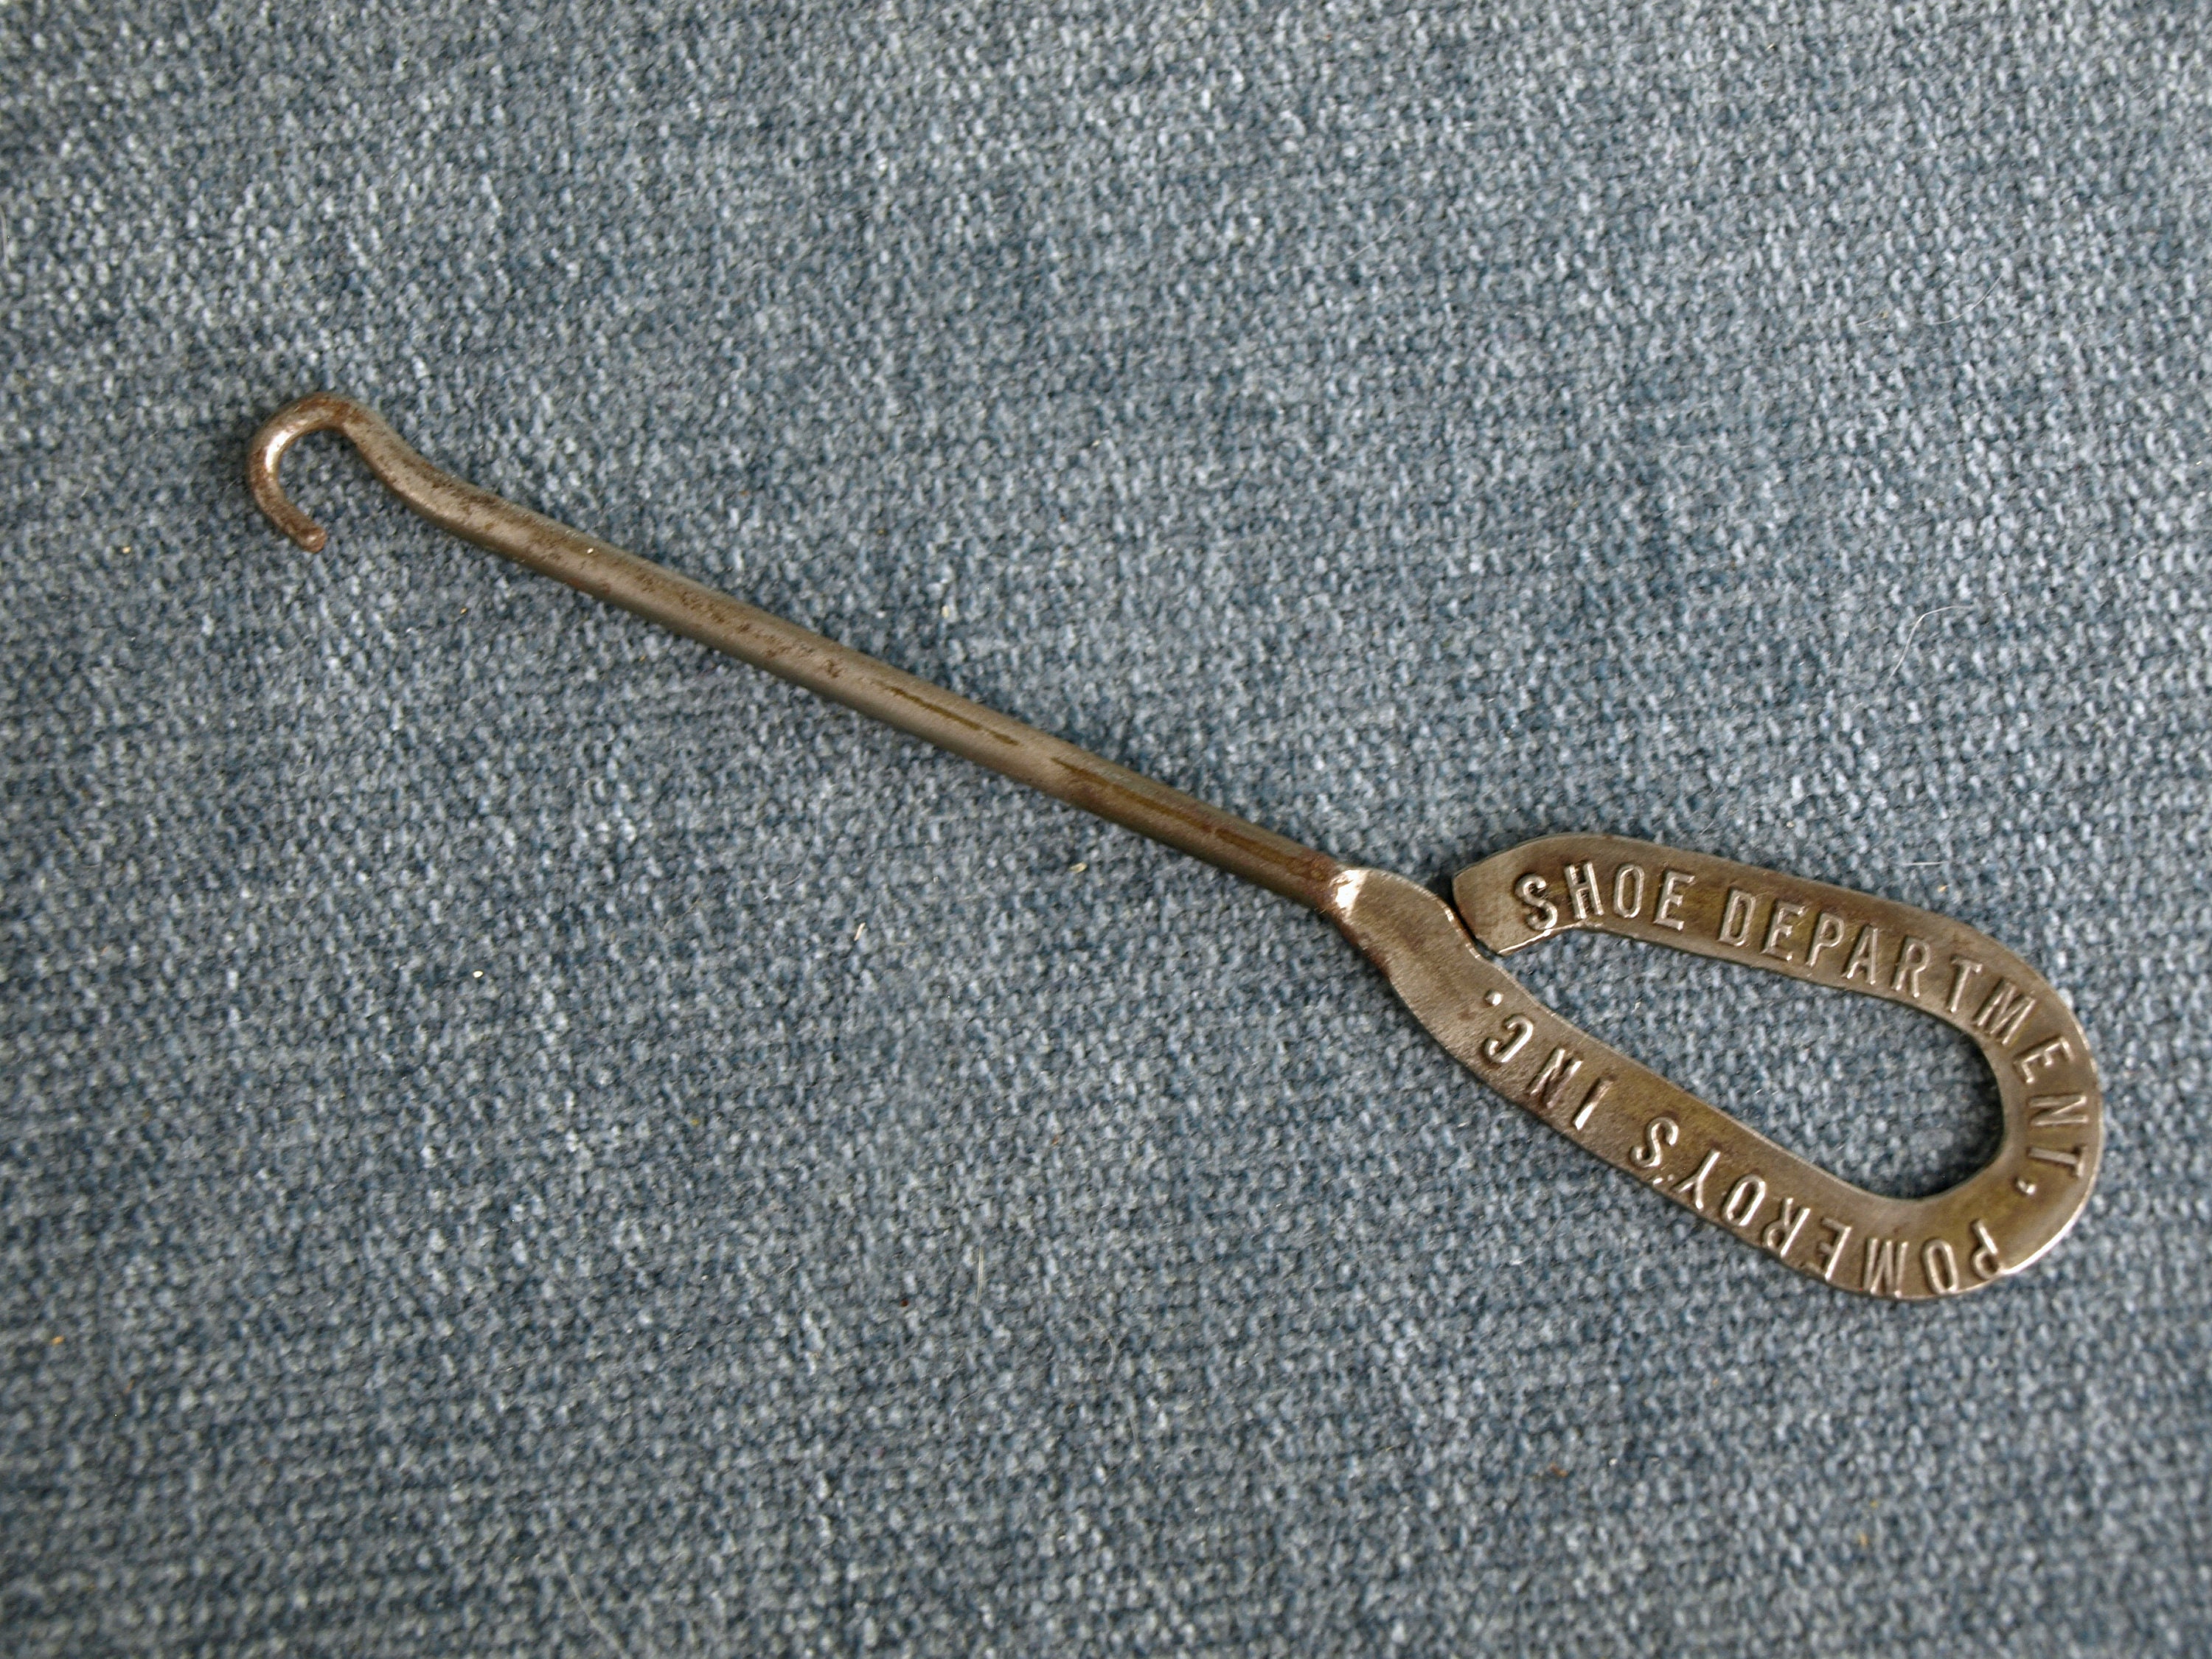 Antique Button Hook From Pomeroy's Shoe Depart. Antique Advertising  Products 